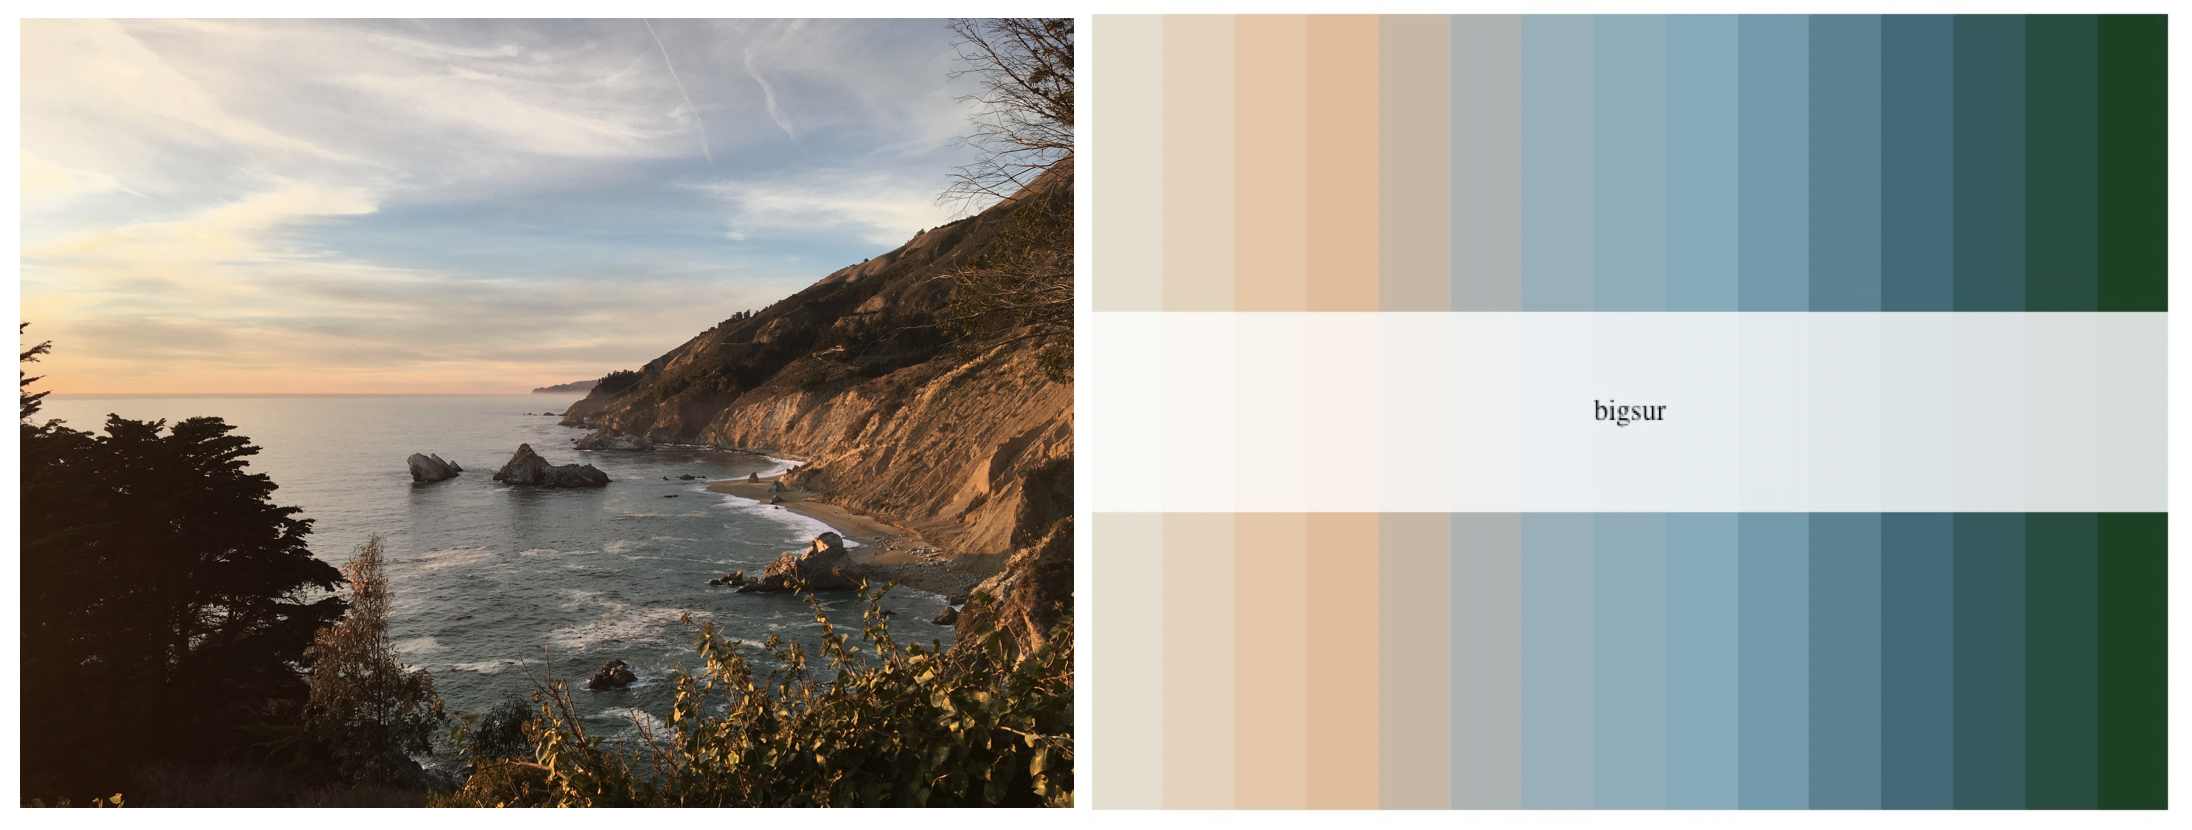 An example of the `bigsur` palette in `calecopal` on the right, with the photo looking out from Julia Pfeiffer State Park during sunset that inspired the palette.